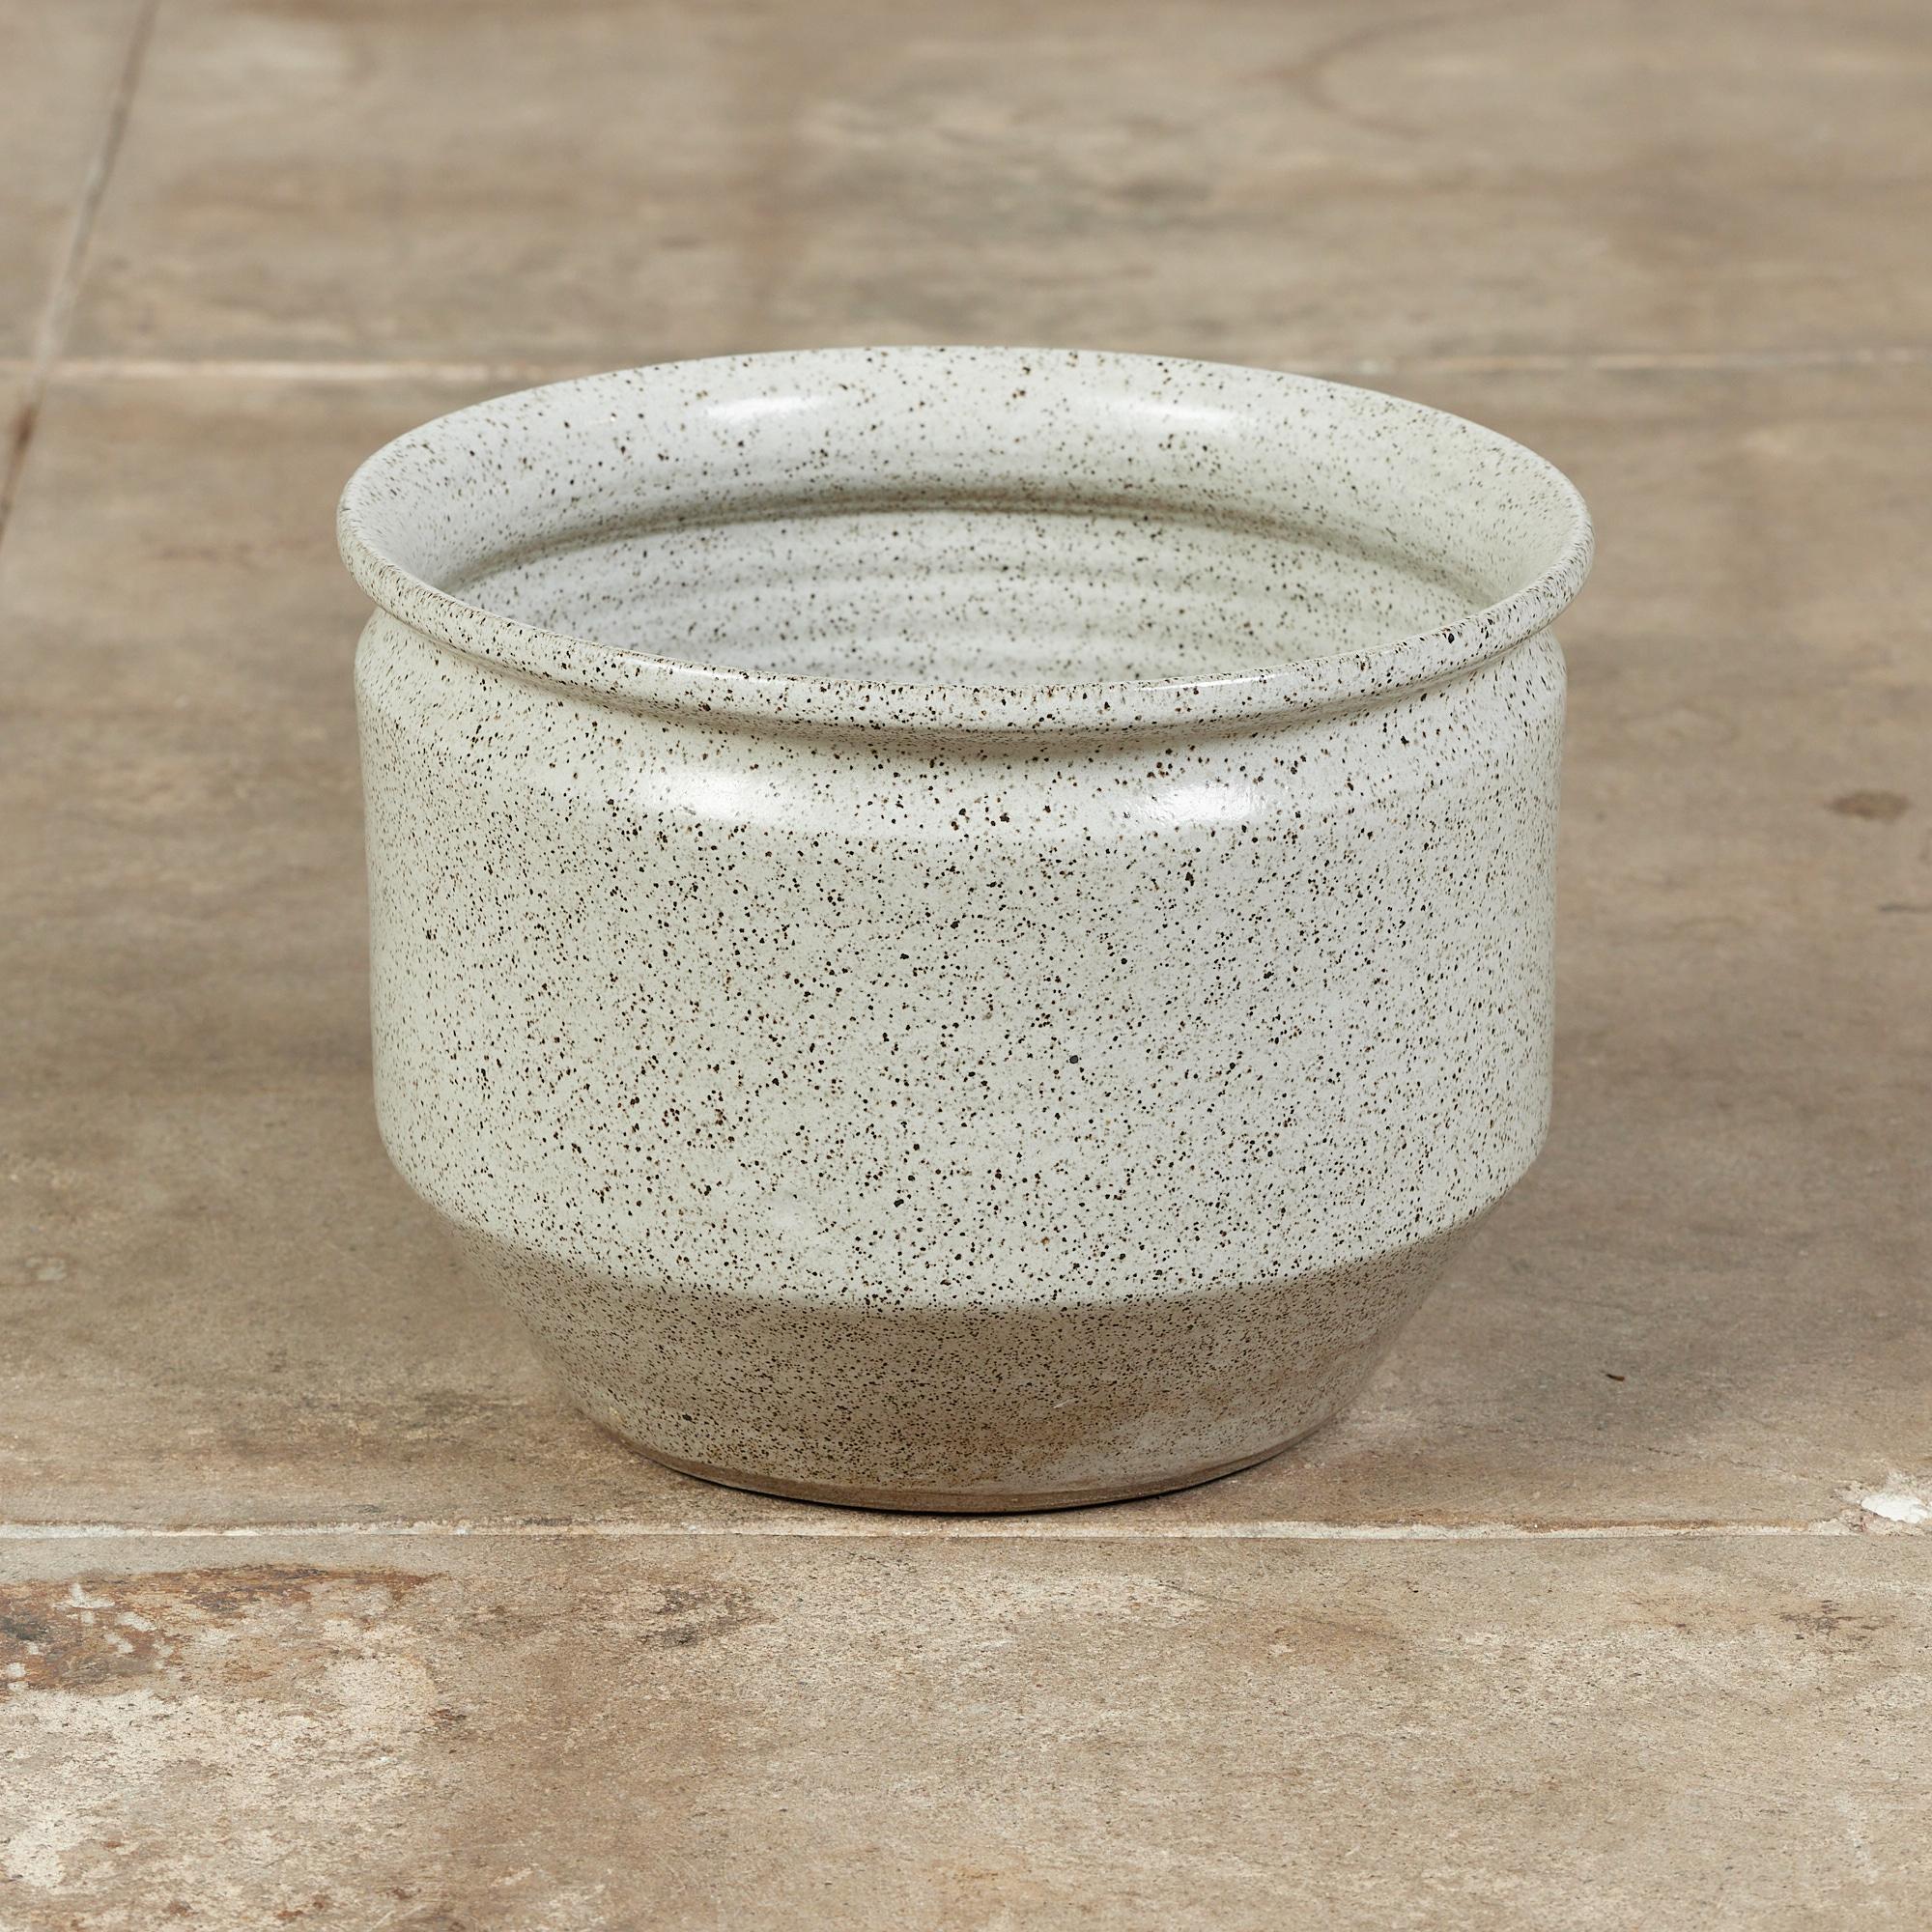 Ceramic bowl planter from David Cressey's Pro/Artisan collection for Architectural Pottery. The planter has a gray speckled glazed interior and exterior, with slightly bowed sides and a flattened lip. 

Dimensions: 11.5